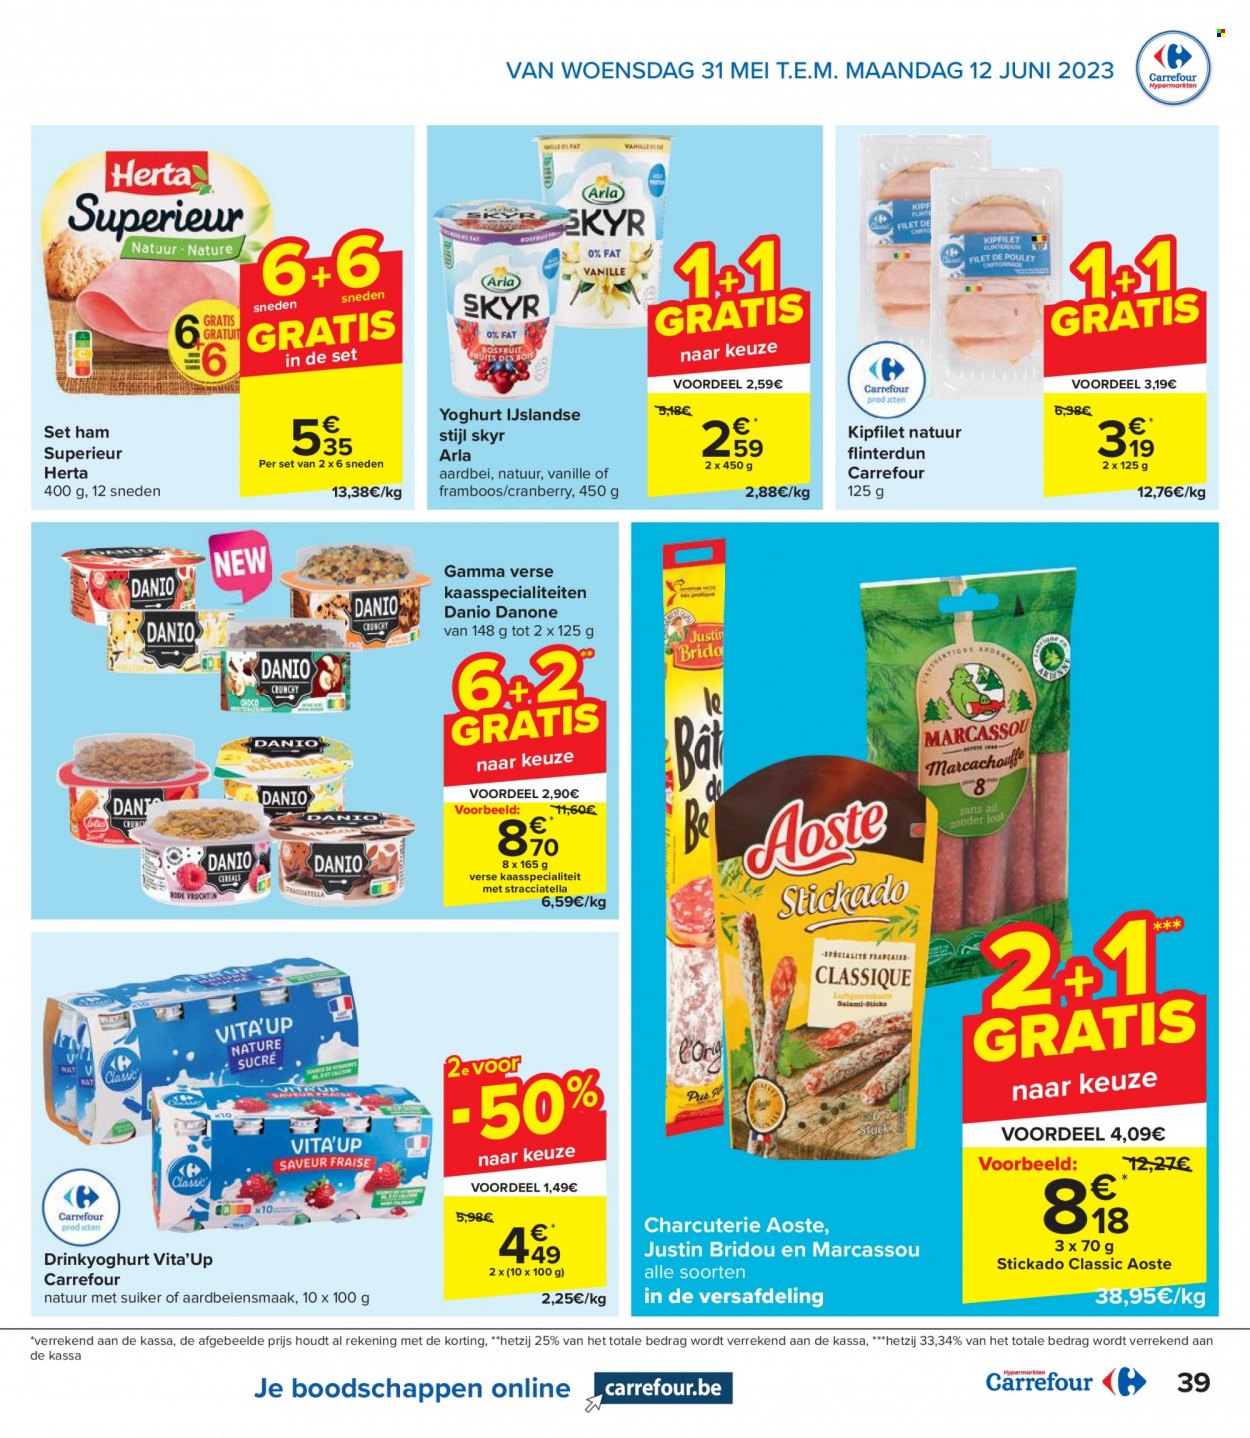 Catalogue Carrefour hypermarkt - 31.5.2023 - 12.6.2023. Page 39.